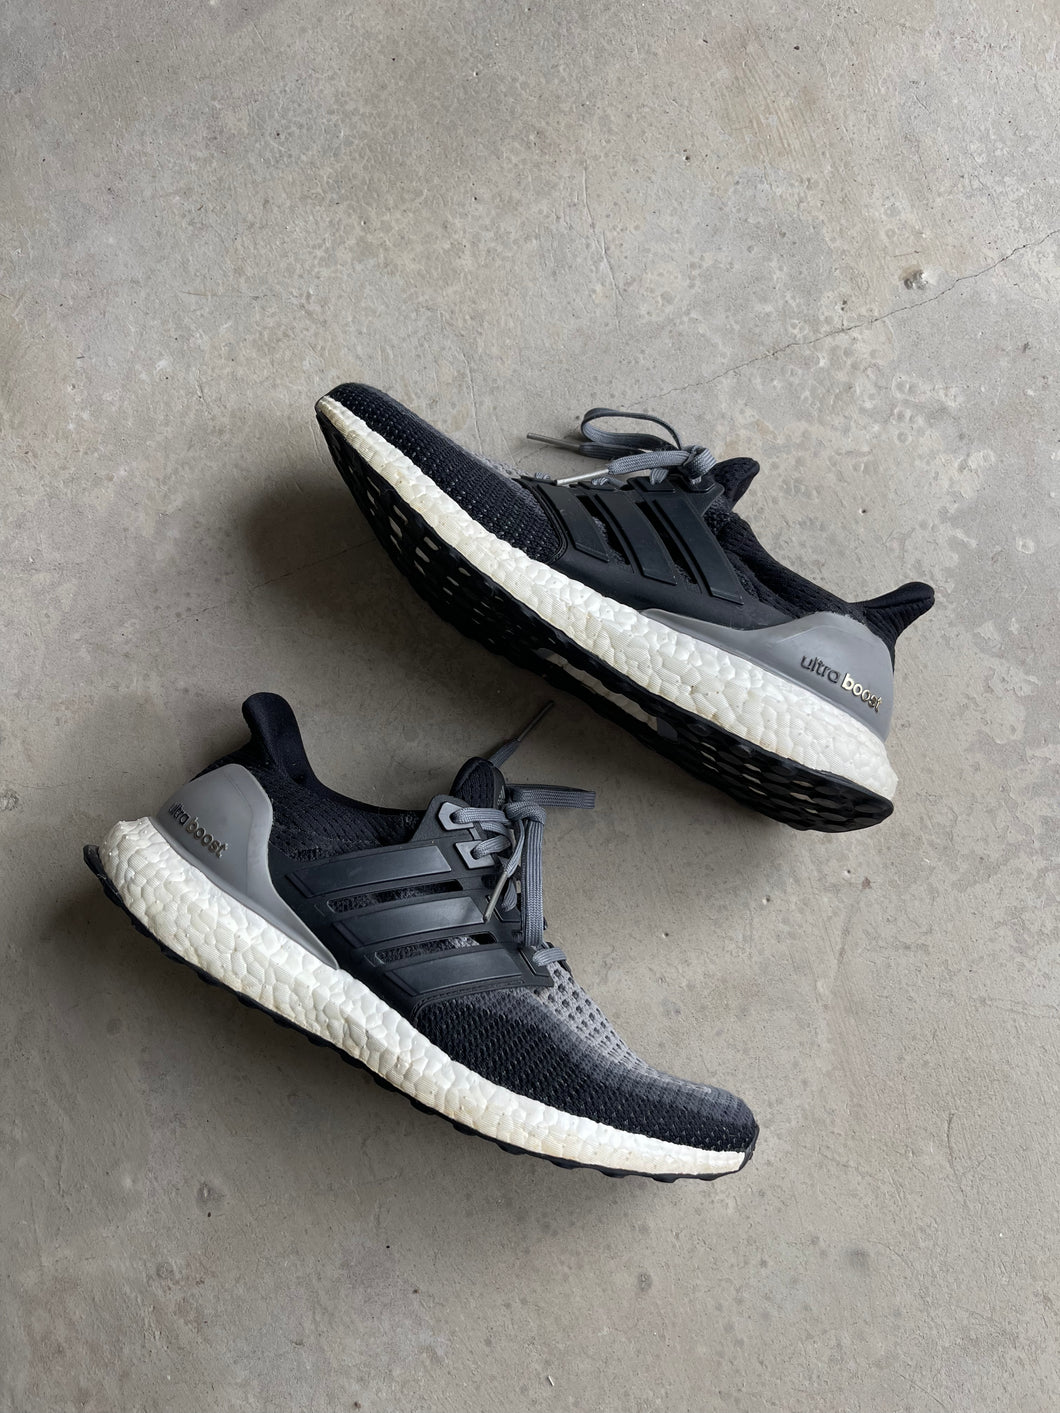 Adidas Ultra Boost Trainers- UK 8